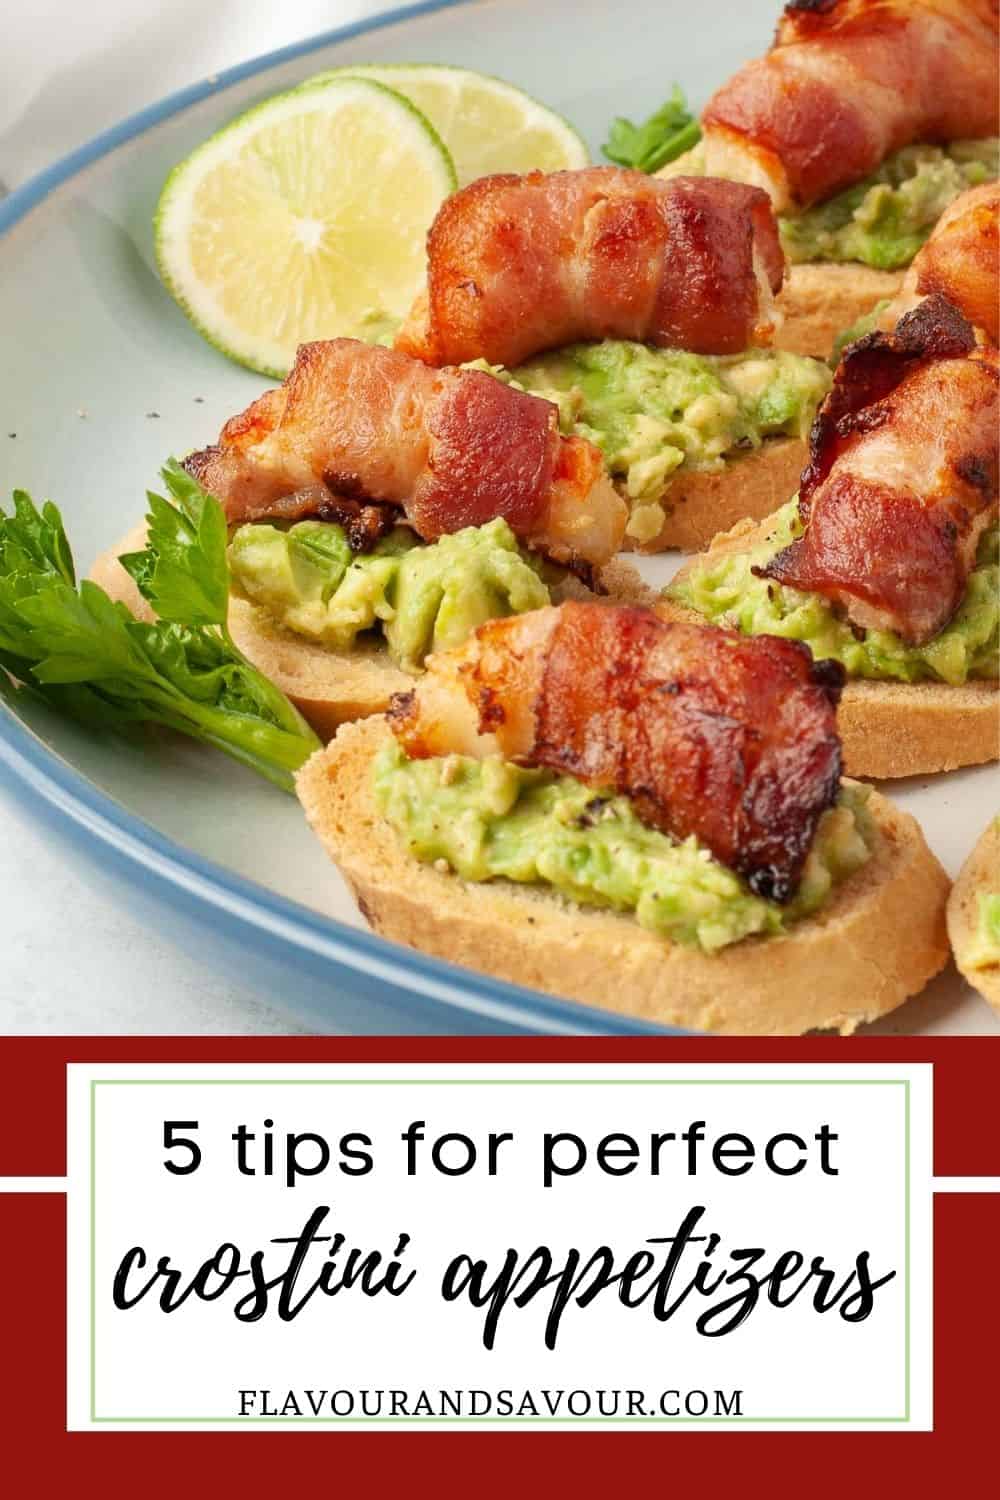 image of bacon wrapped shrimp with text 5 tips for perfect crostini appetizers